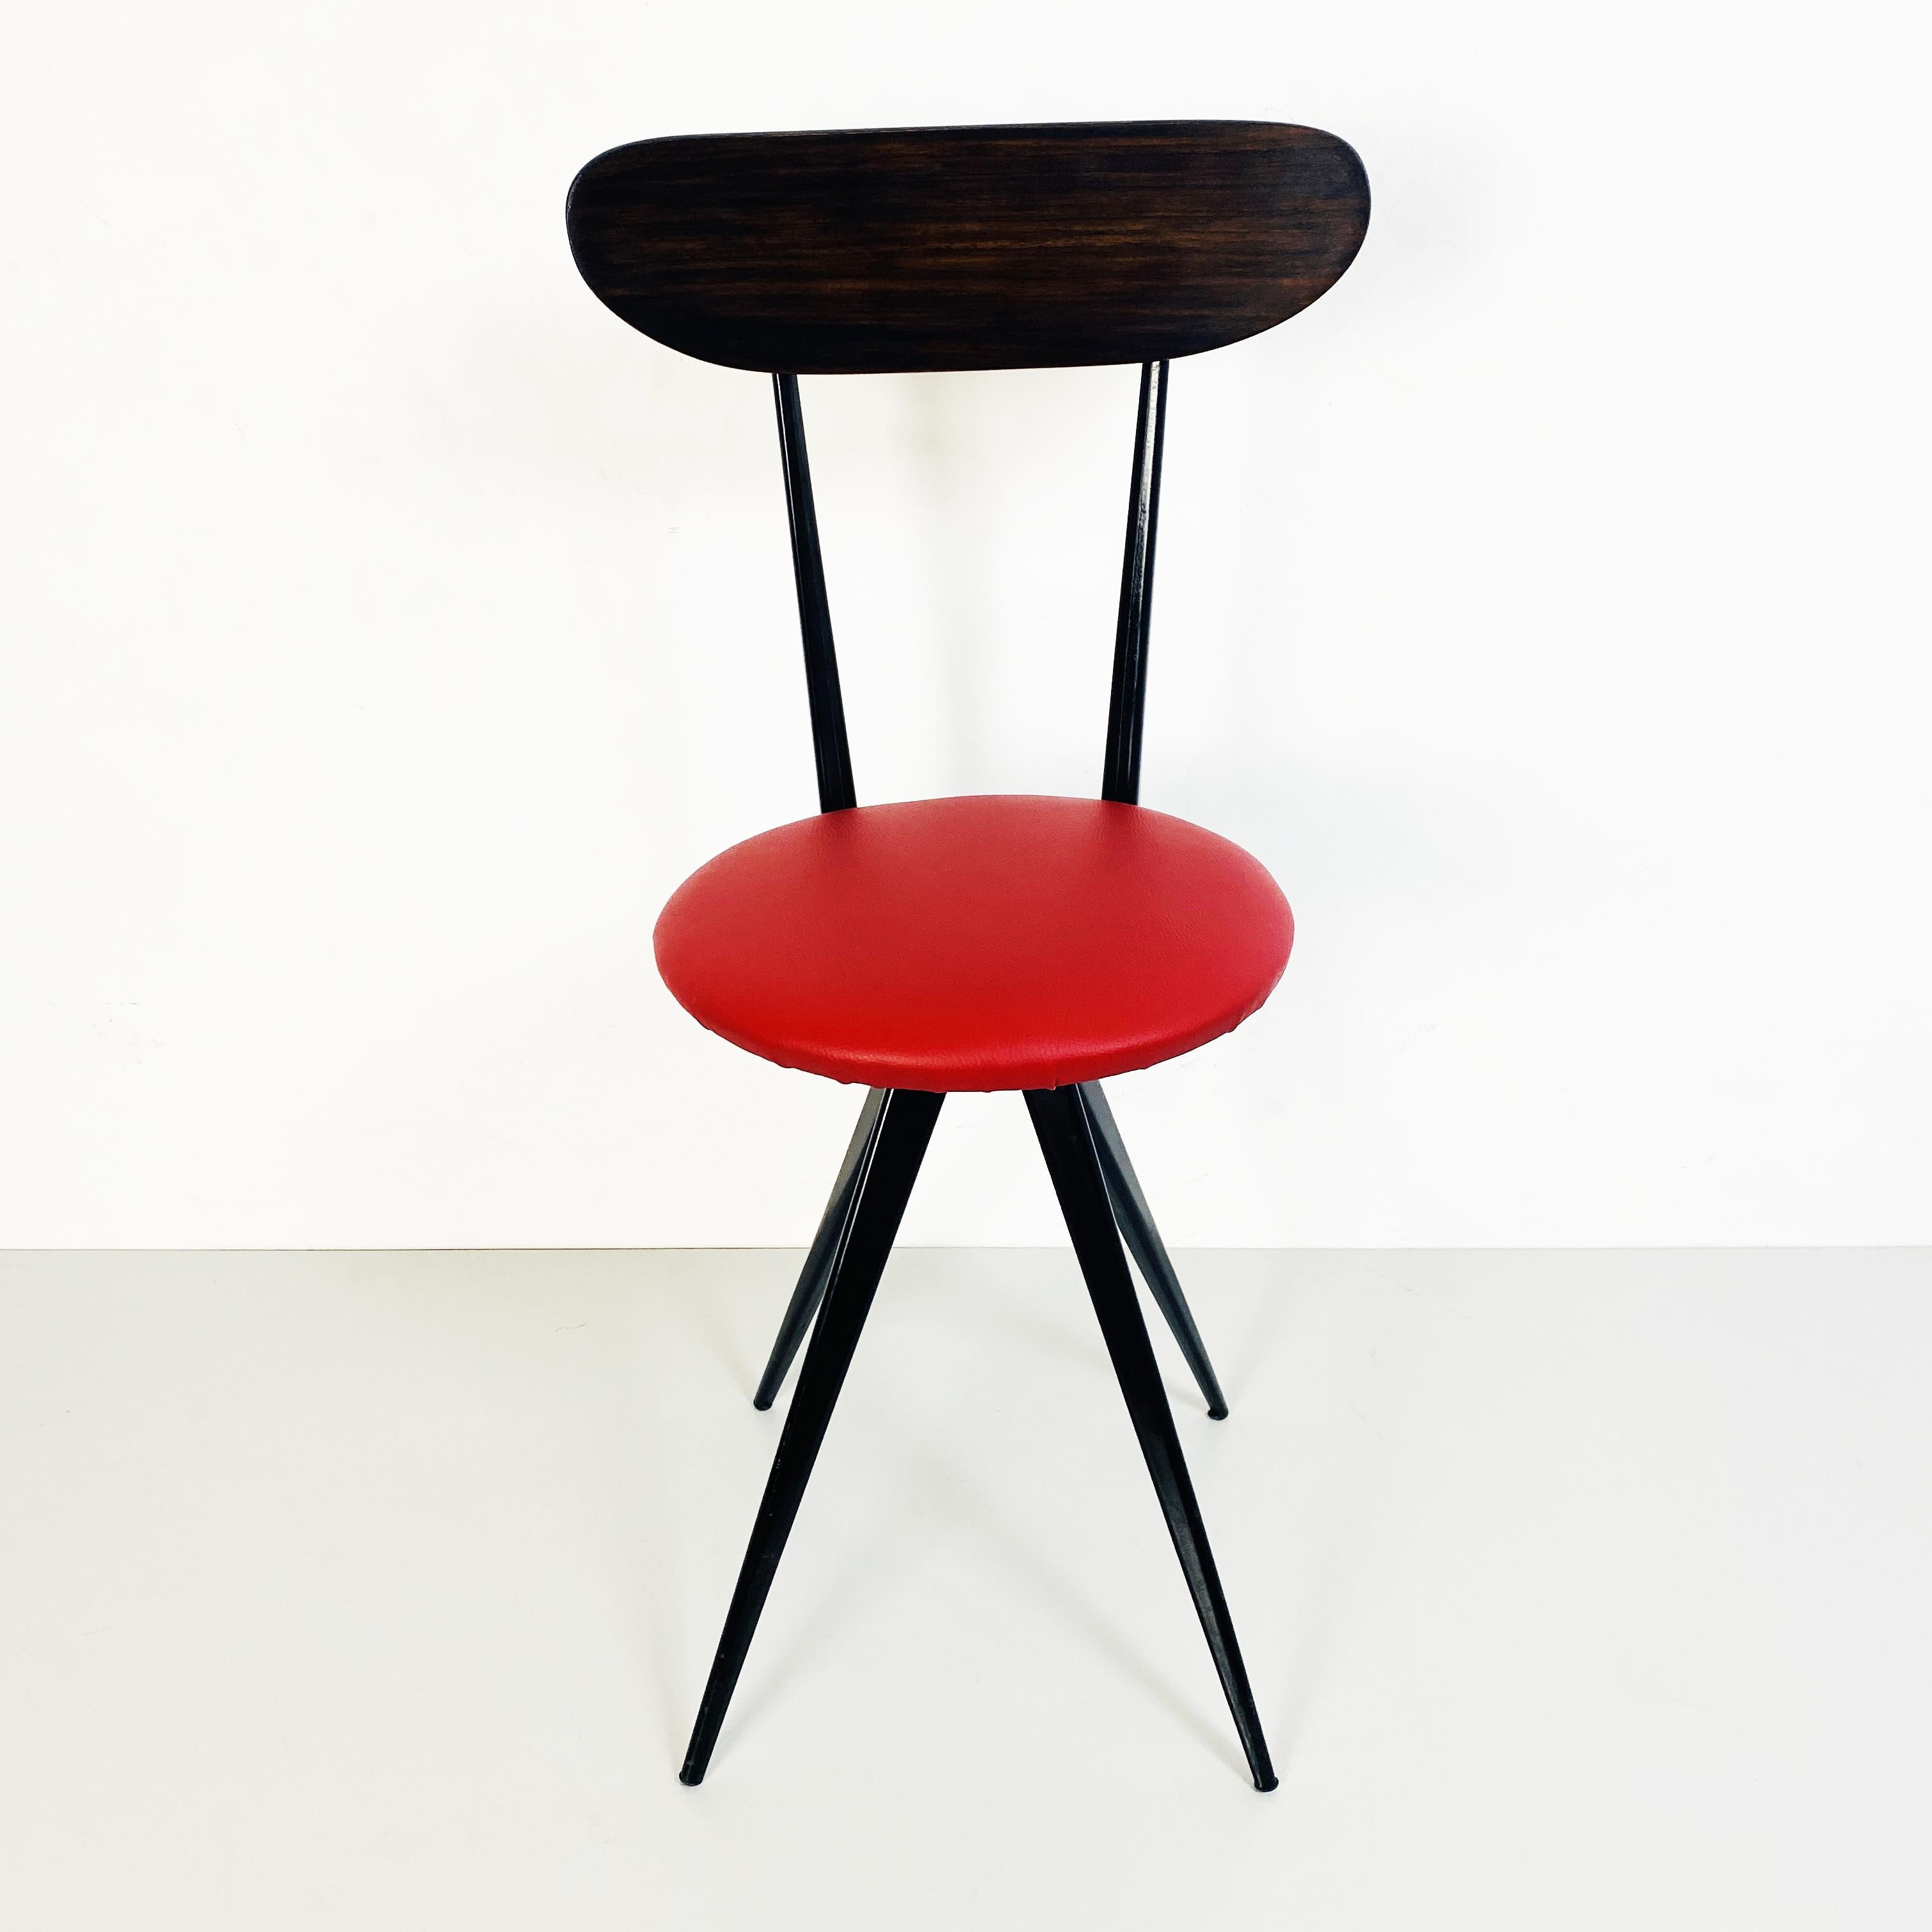 Italian Mid-Century Chair with Red Sky Seat, Metal and Wooded Structure, 1960s 1